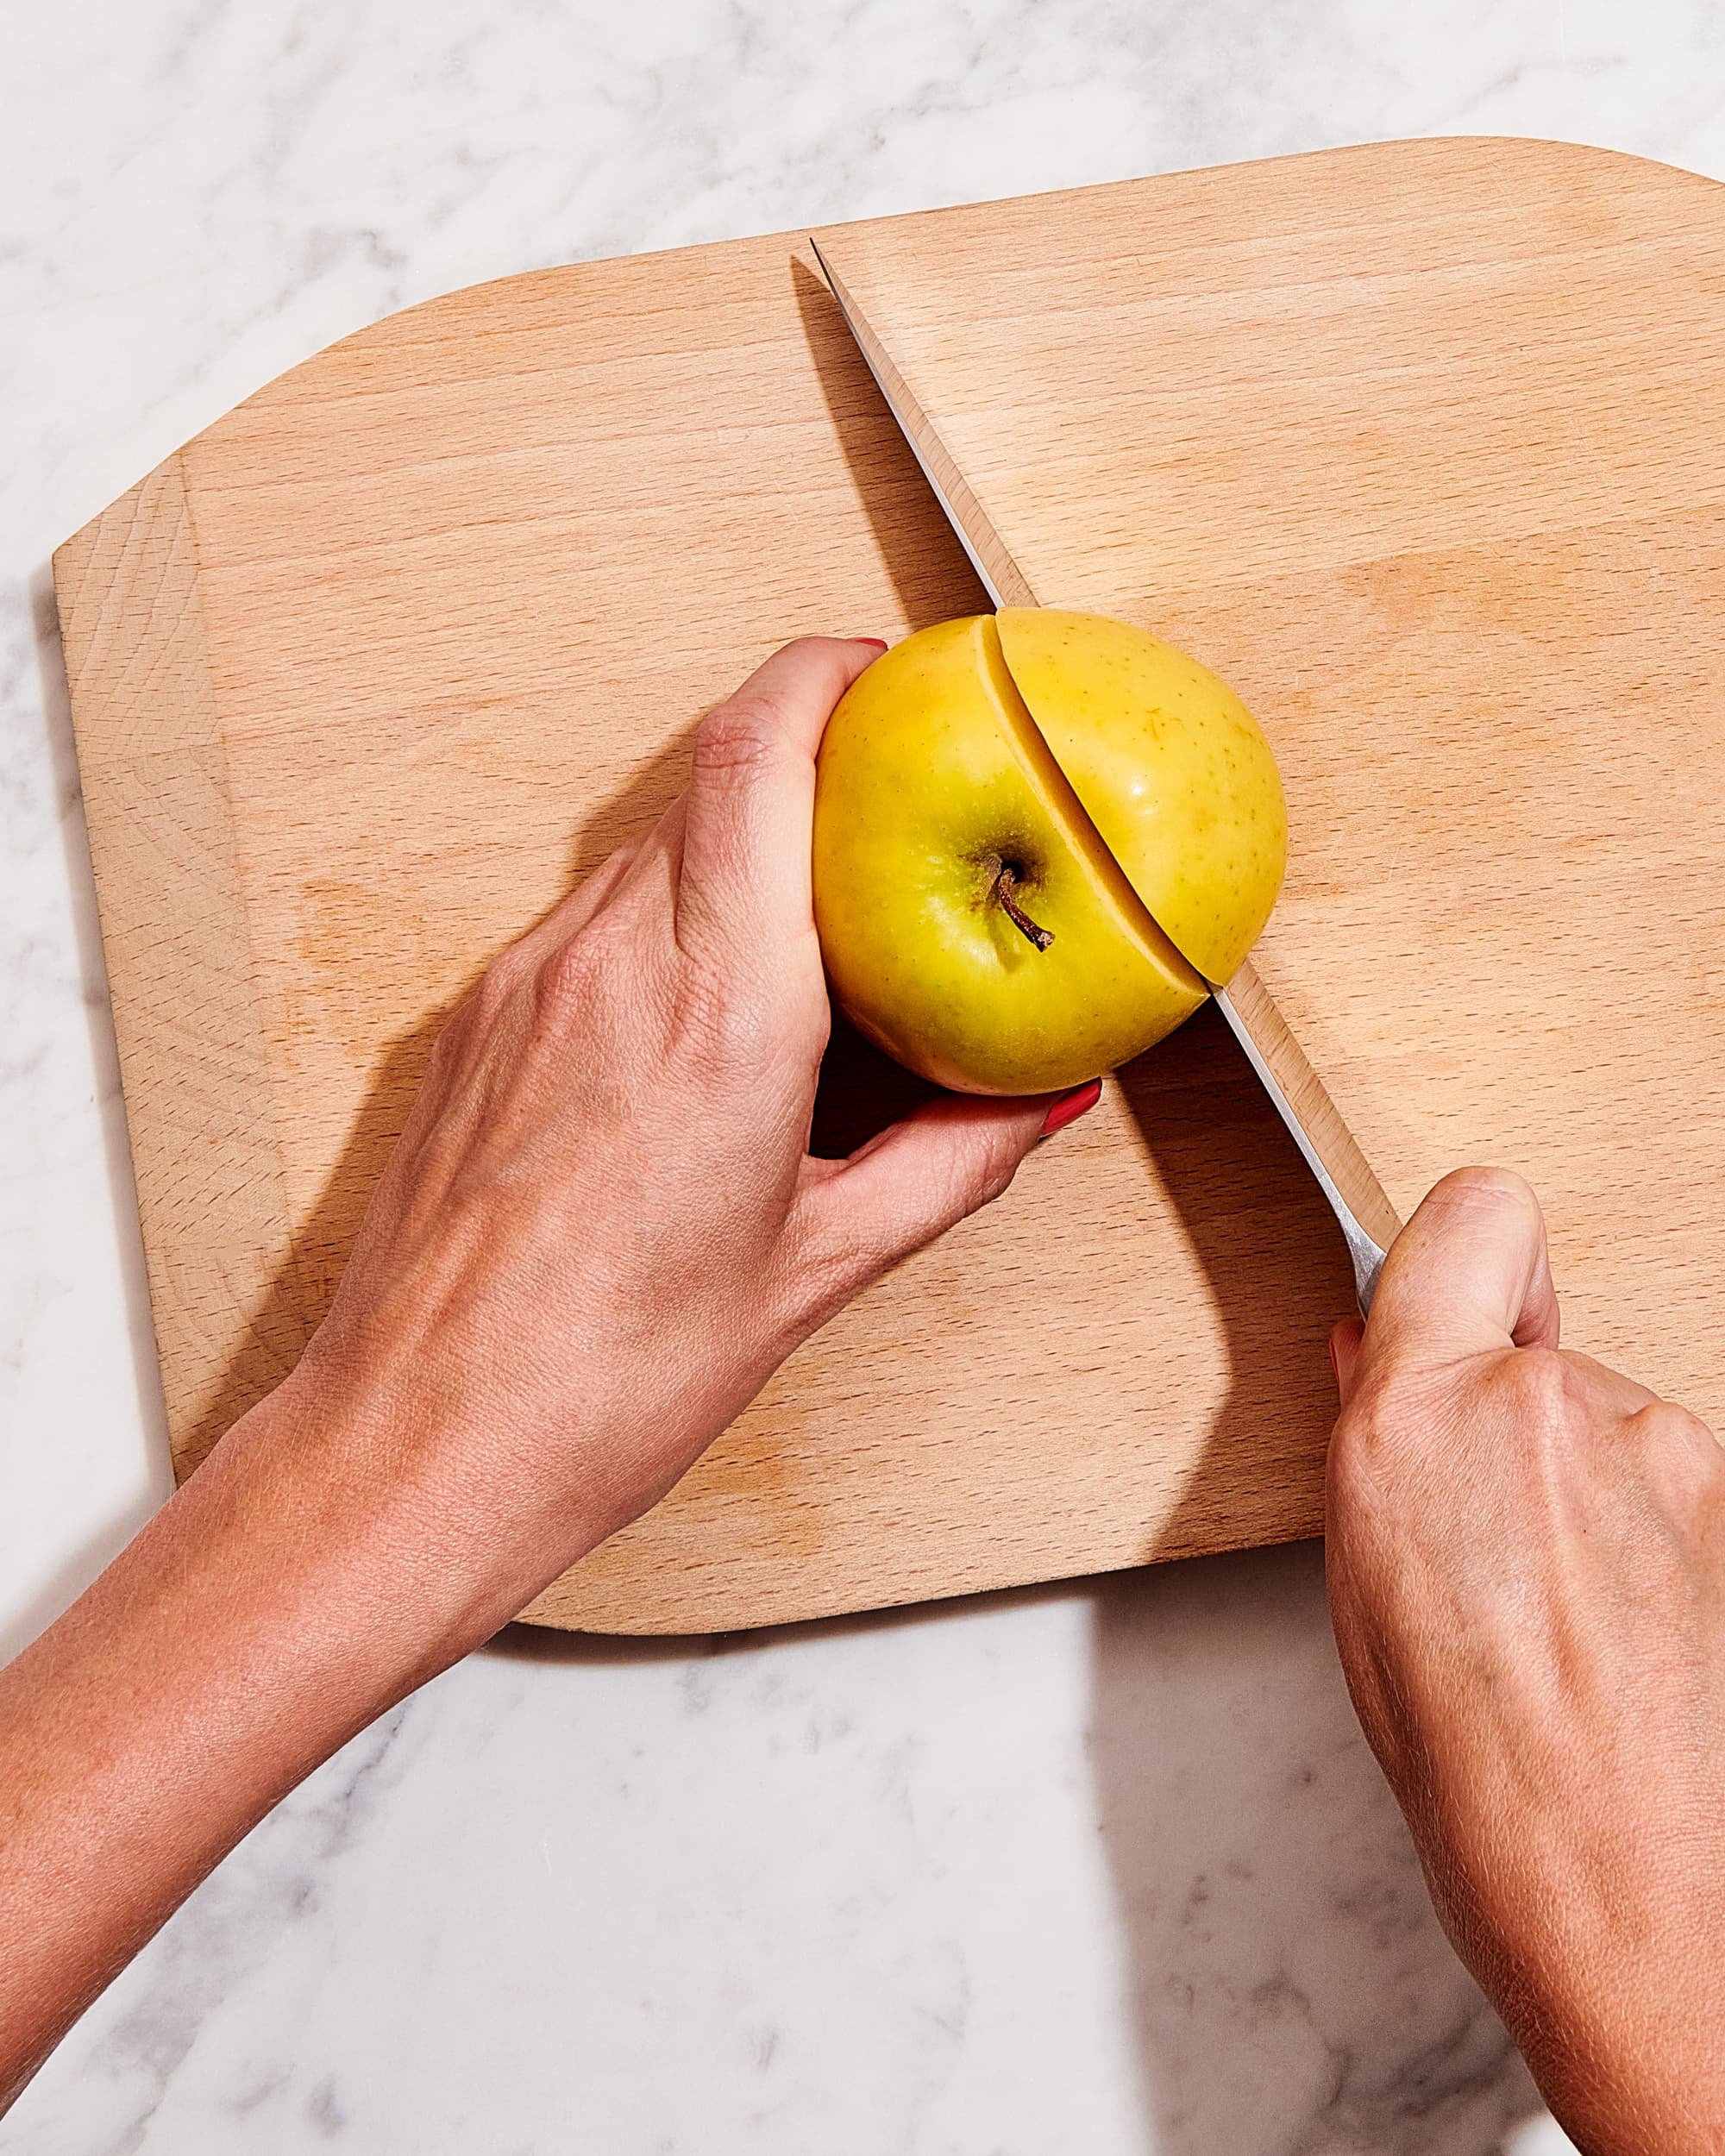 Tips for Better Baking – Cutting Apples (#32)